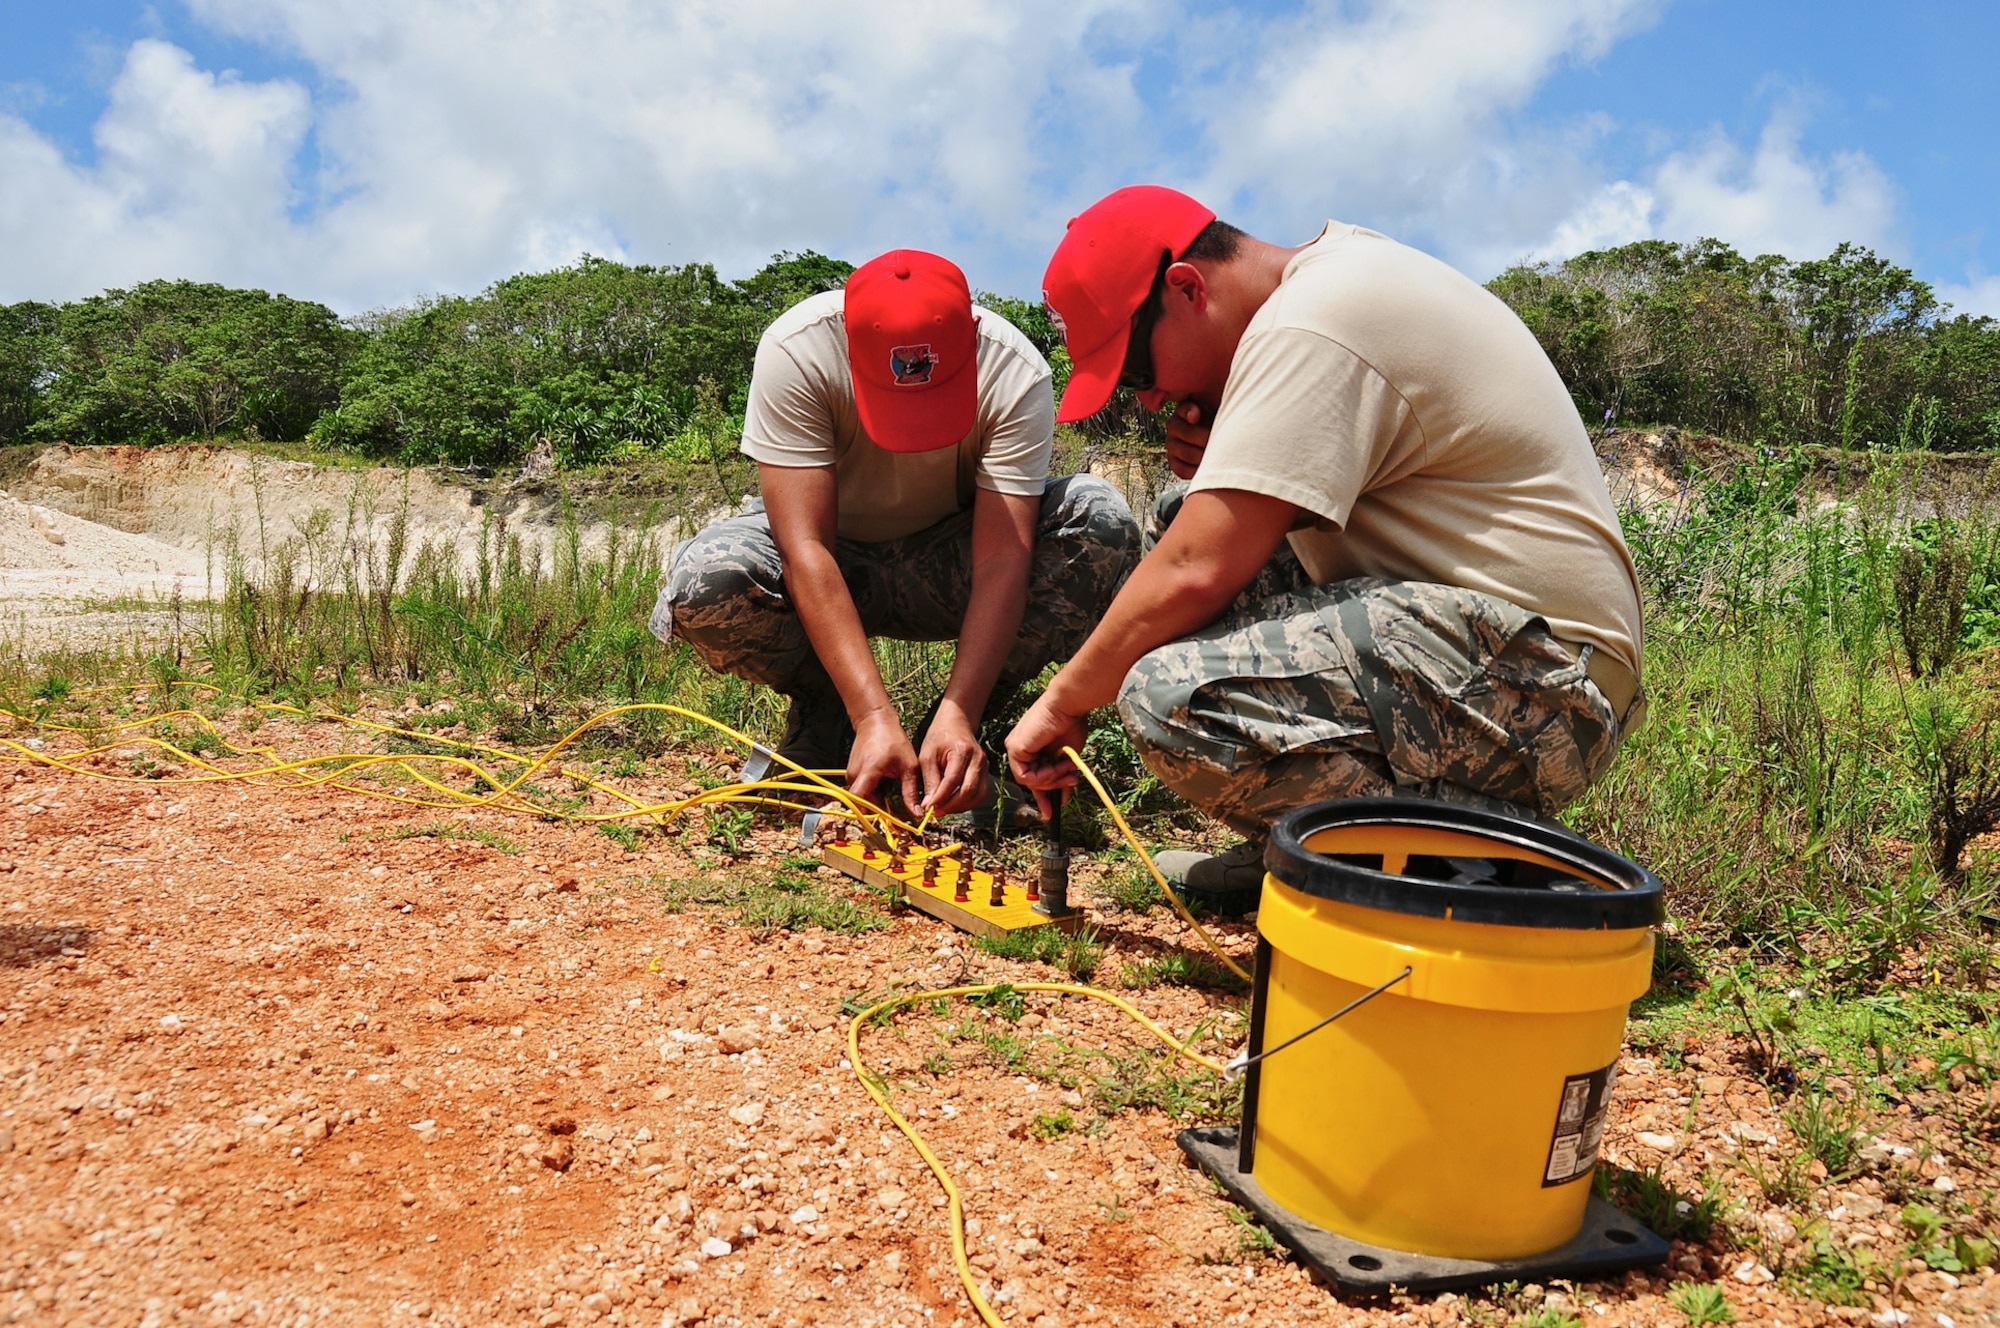 The 554th RED HORSE Squadron explosive demolition team members connect the explosives’ wires to the sequential board during set up for a blast at the RED HORSE quarry, June 6.  The team blasts once a month to stay qualified and at least once a quarter to obtain raw material from the quarry. (U.S. Air Force photo by Airman 1st Class Marianique Santos/Released)